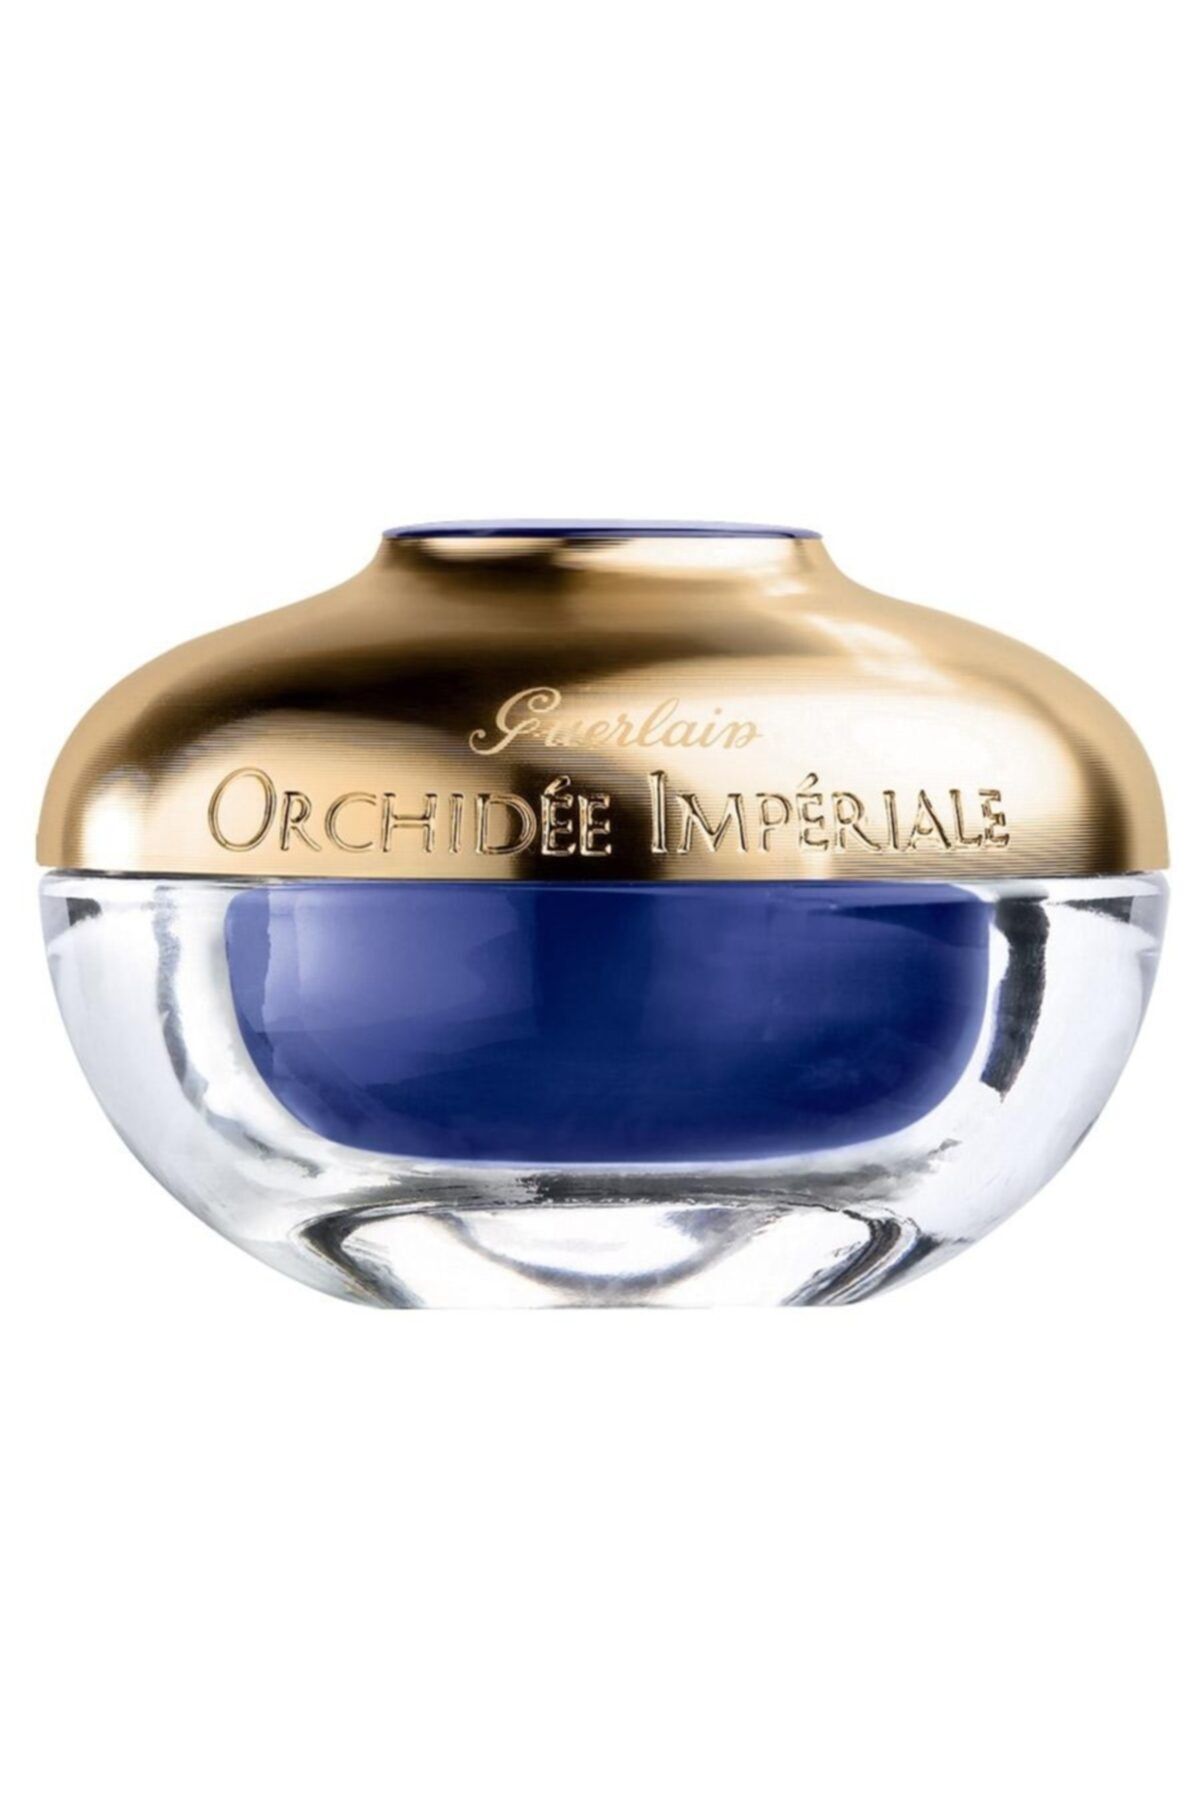 Guerlain Orchidee Imperiale Soin Complet D'exception Creme 30 ml